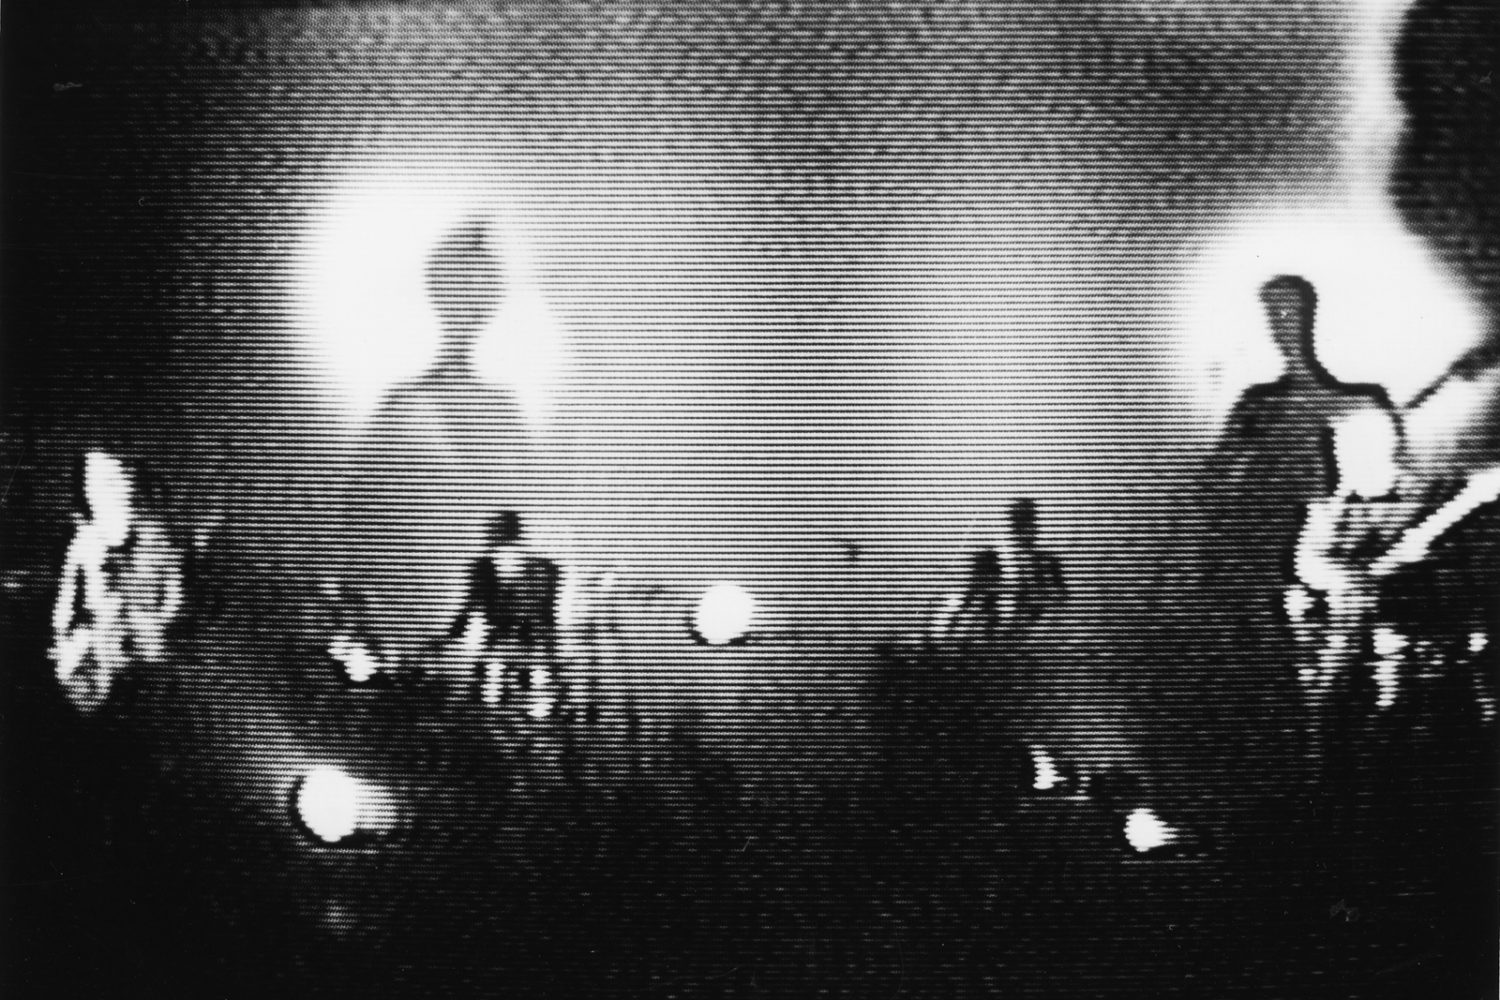 Personal Effects performing at "This Is It" show at Community Playhouse in 1984. Video still by Duane Sherwood.